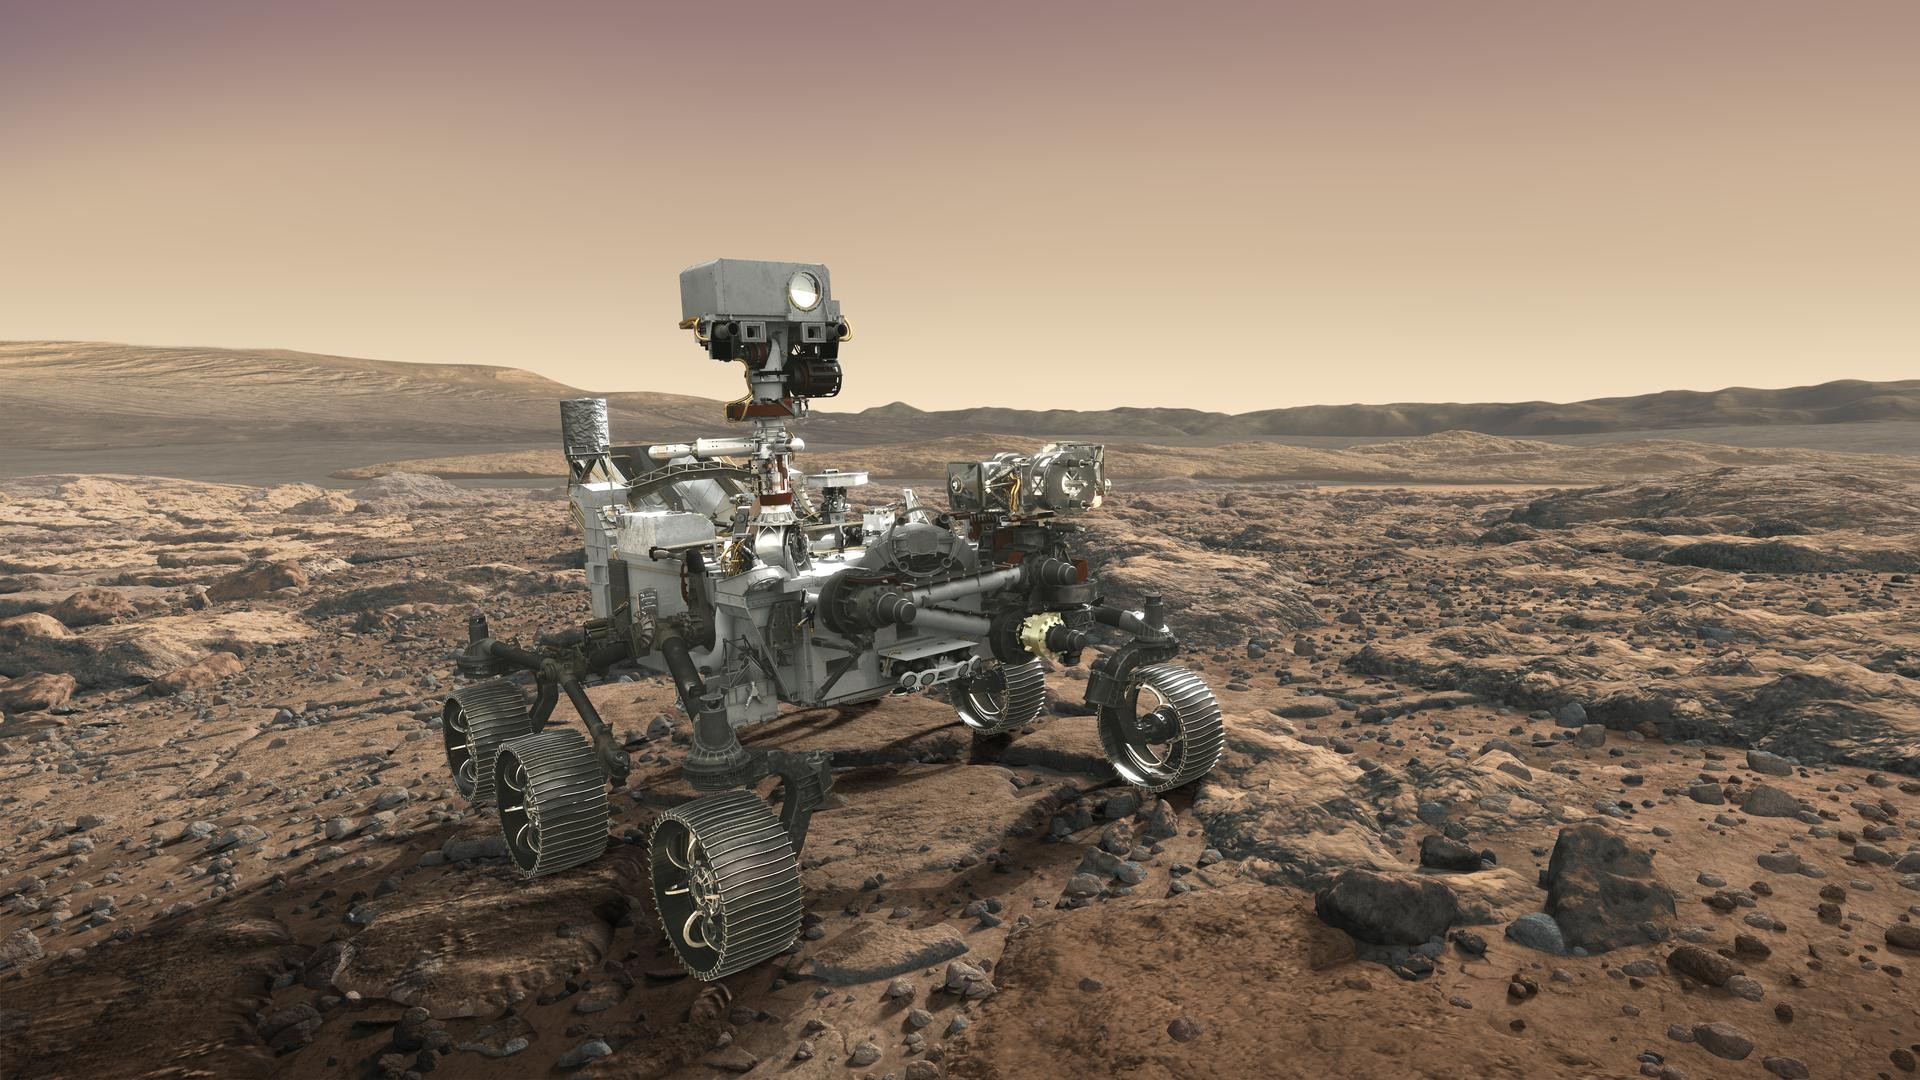  Detecting life on Mars may be 'impossible' with current NASA rovers, new study warns 